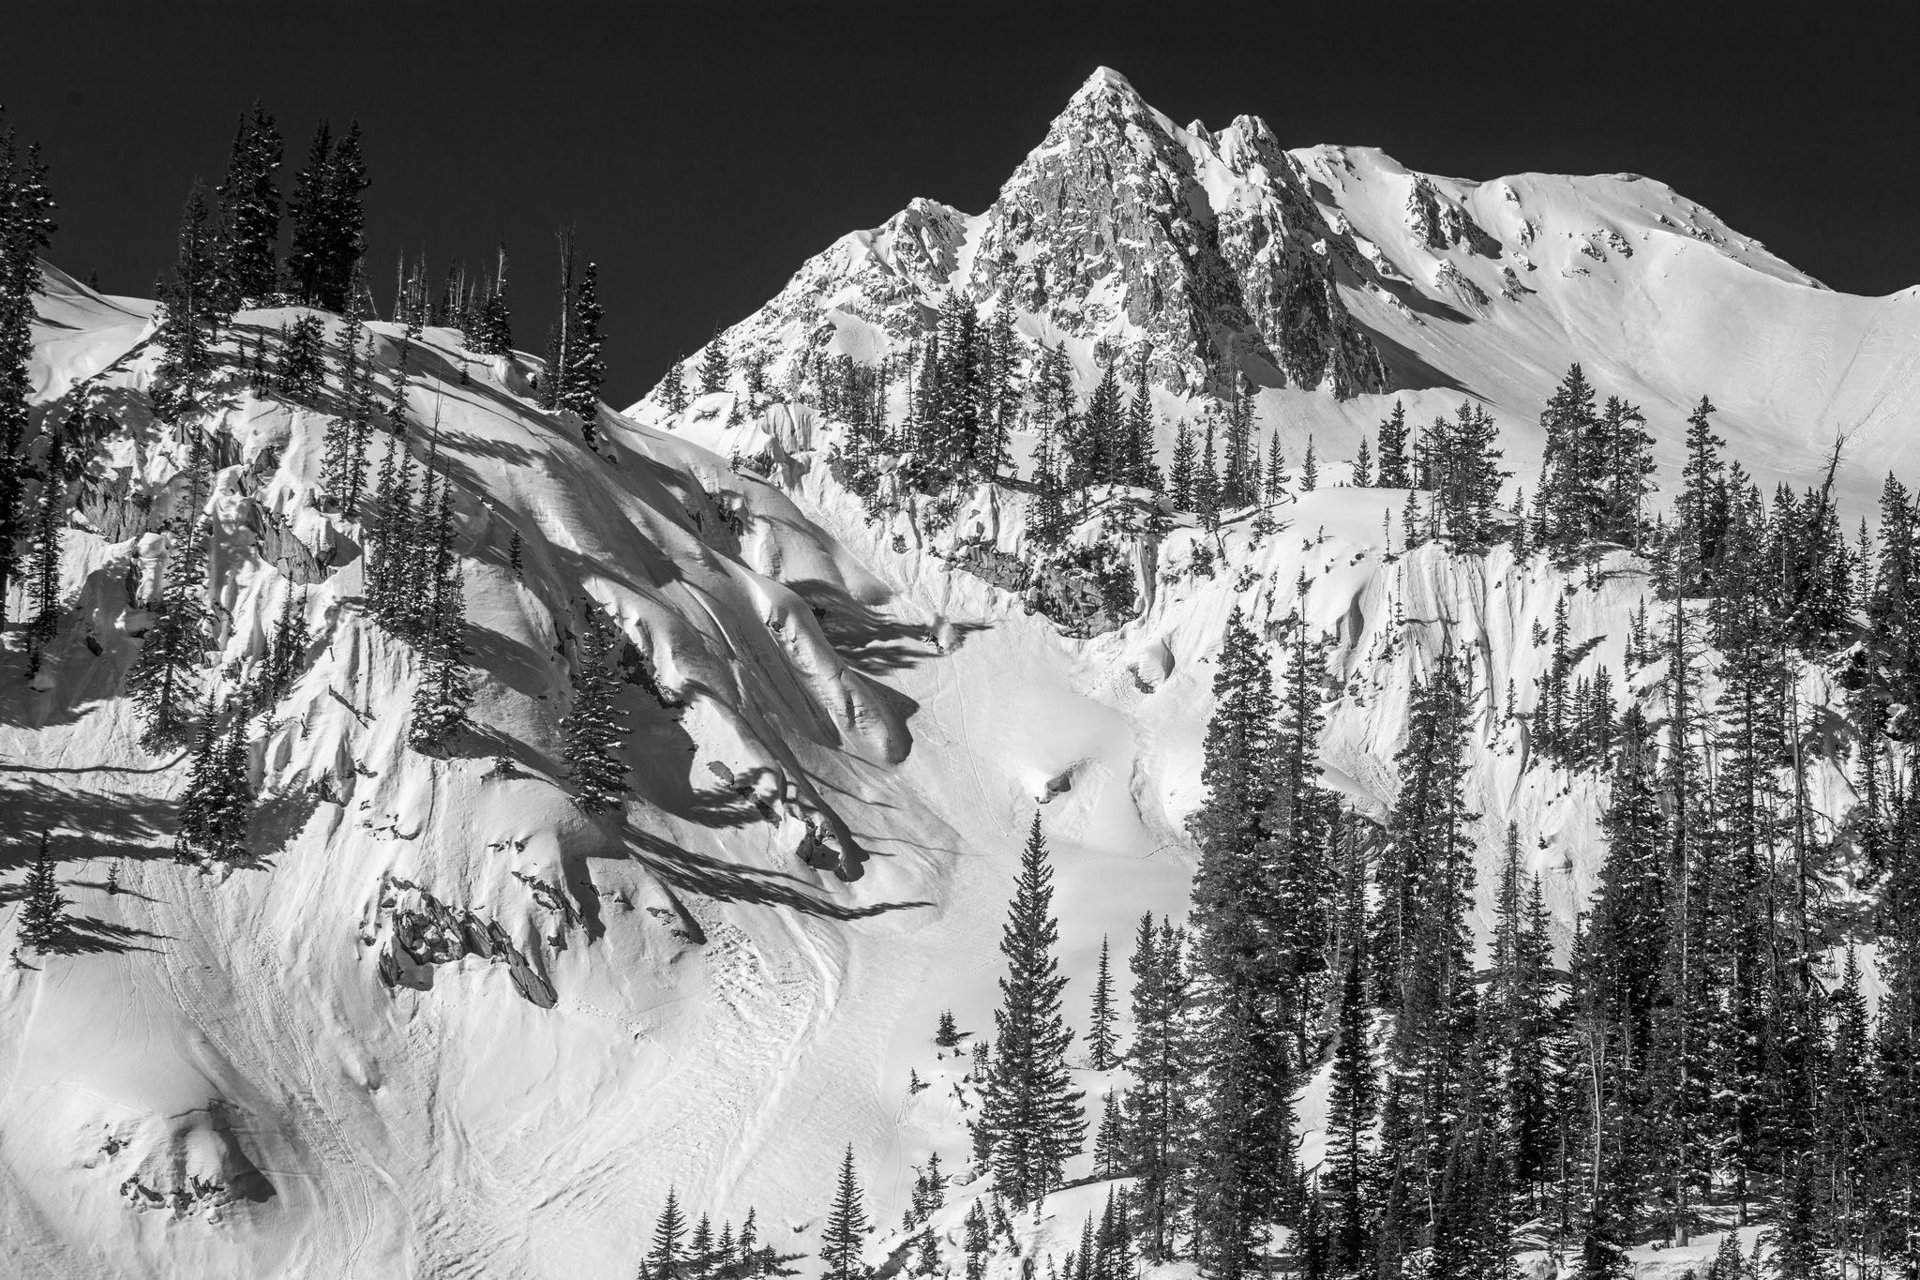 Black and white gladed snow covered mountain face with pine trees and ski tracks.